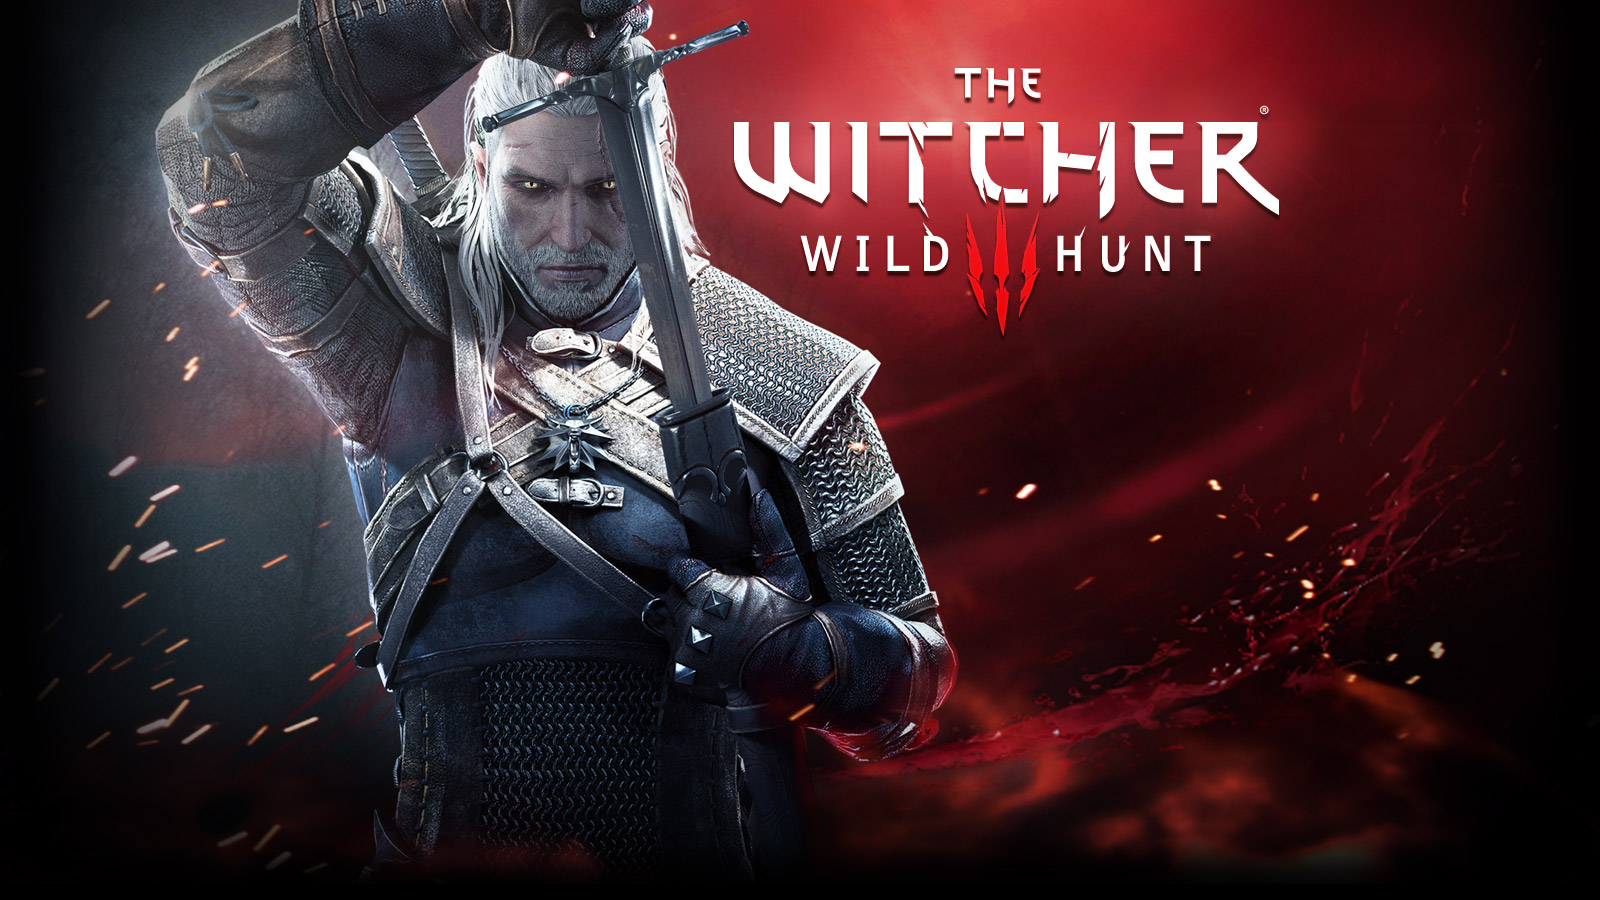 The Witcher 3 cd projekt red